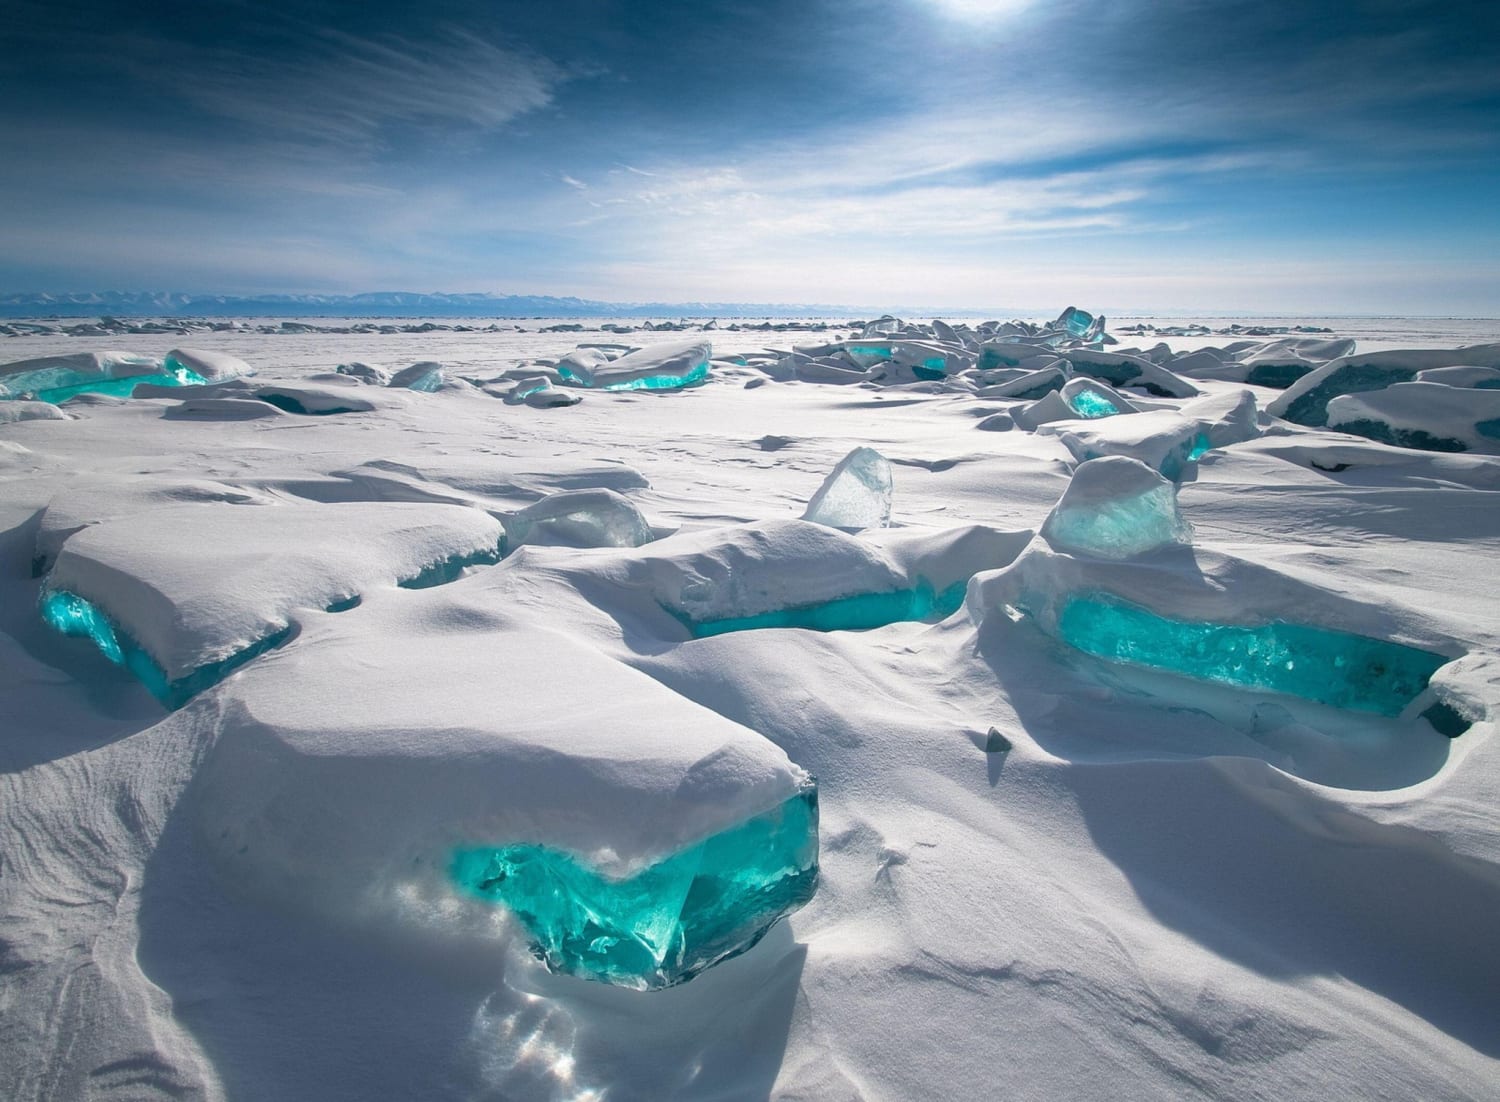 This is what the turquoise ice formations on Lake Baikal, Russia Look like.